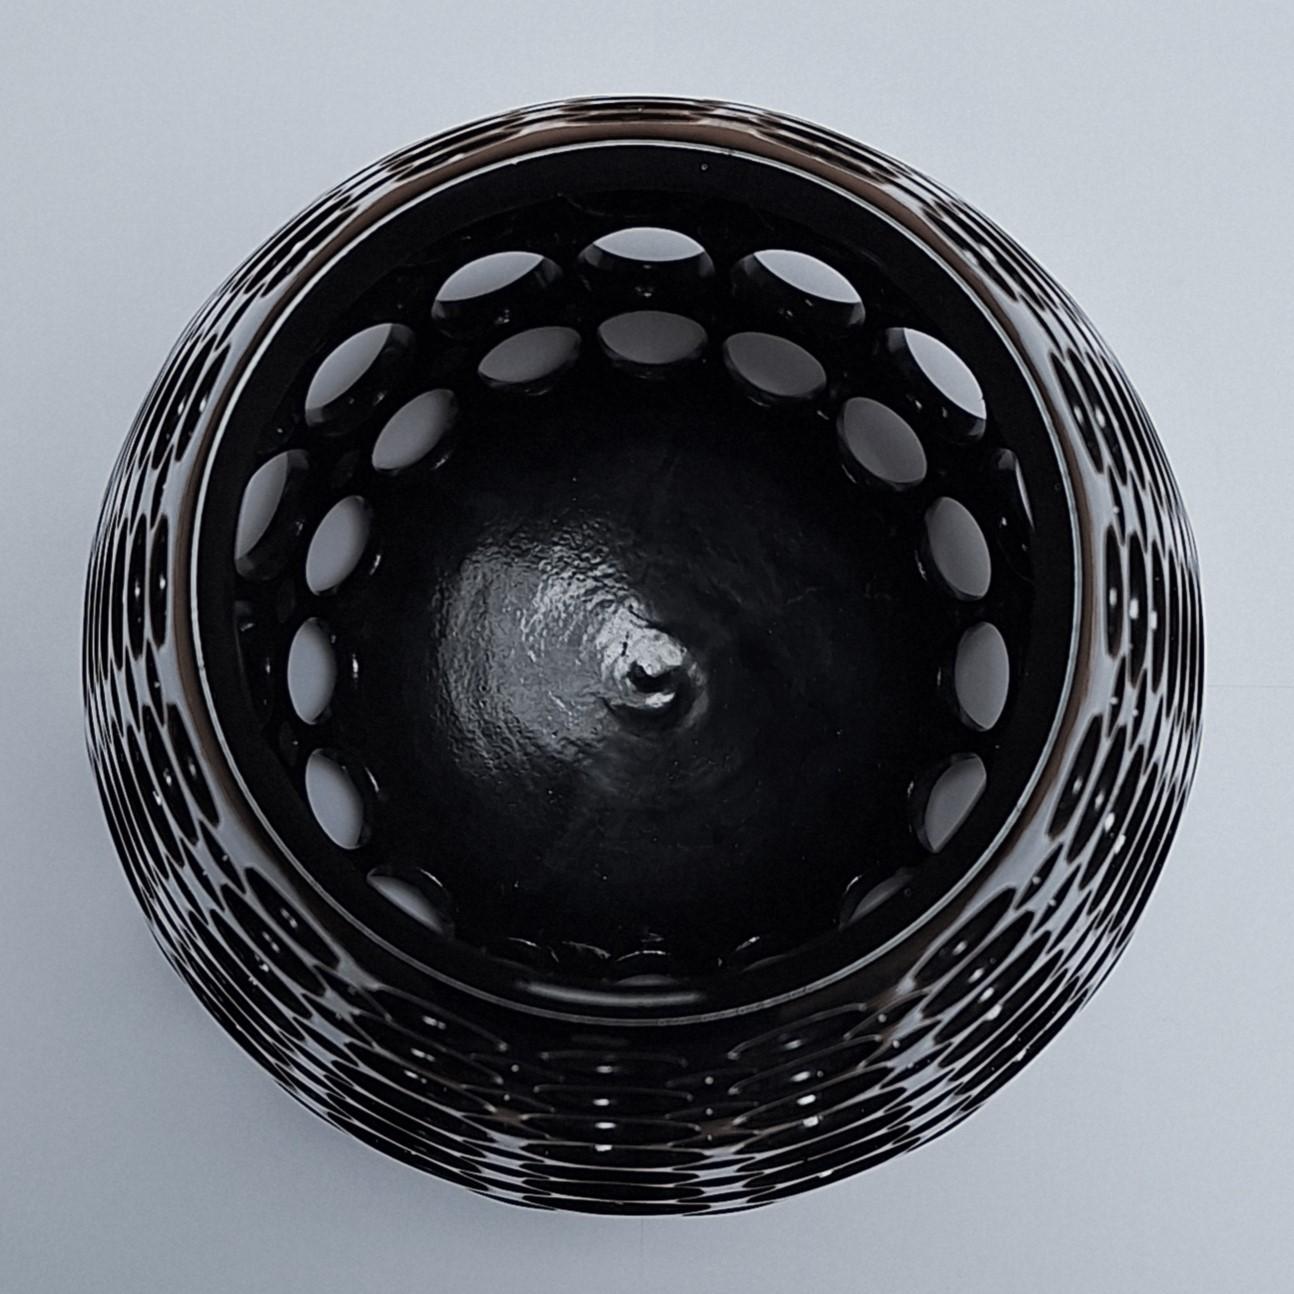 This Elongated Teardrop Round Lace Black Vessel is a unique medium size contemporary modern ceramic object by Californian artist Lynne Meade. It is wheel thrown, hand pierced and has a smooth black gloss glaze. Everything is done by eye, without